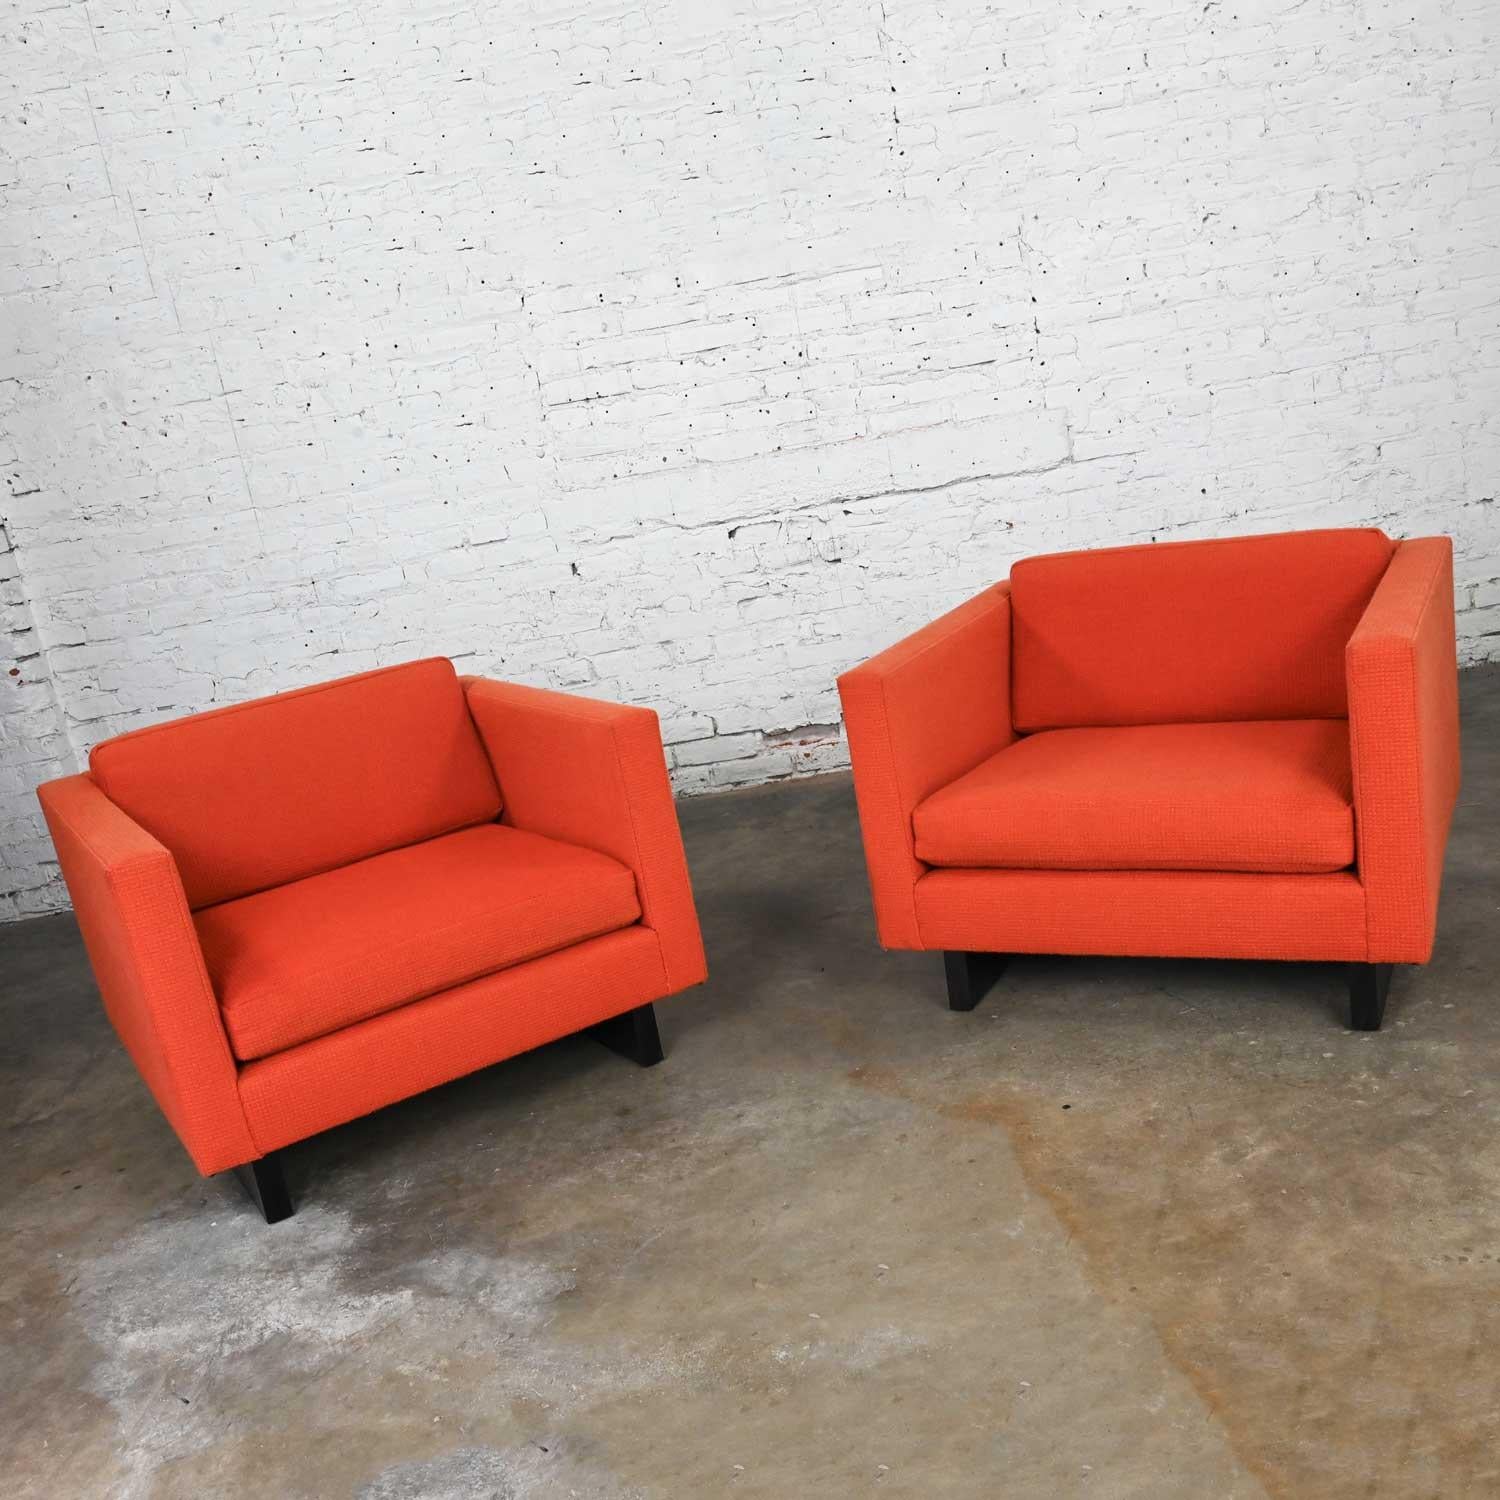 1970s Mcm to Modern Harvey Probber Club Chairs Orange 1571 Tuxedo Sleigh Bases For Sale 3